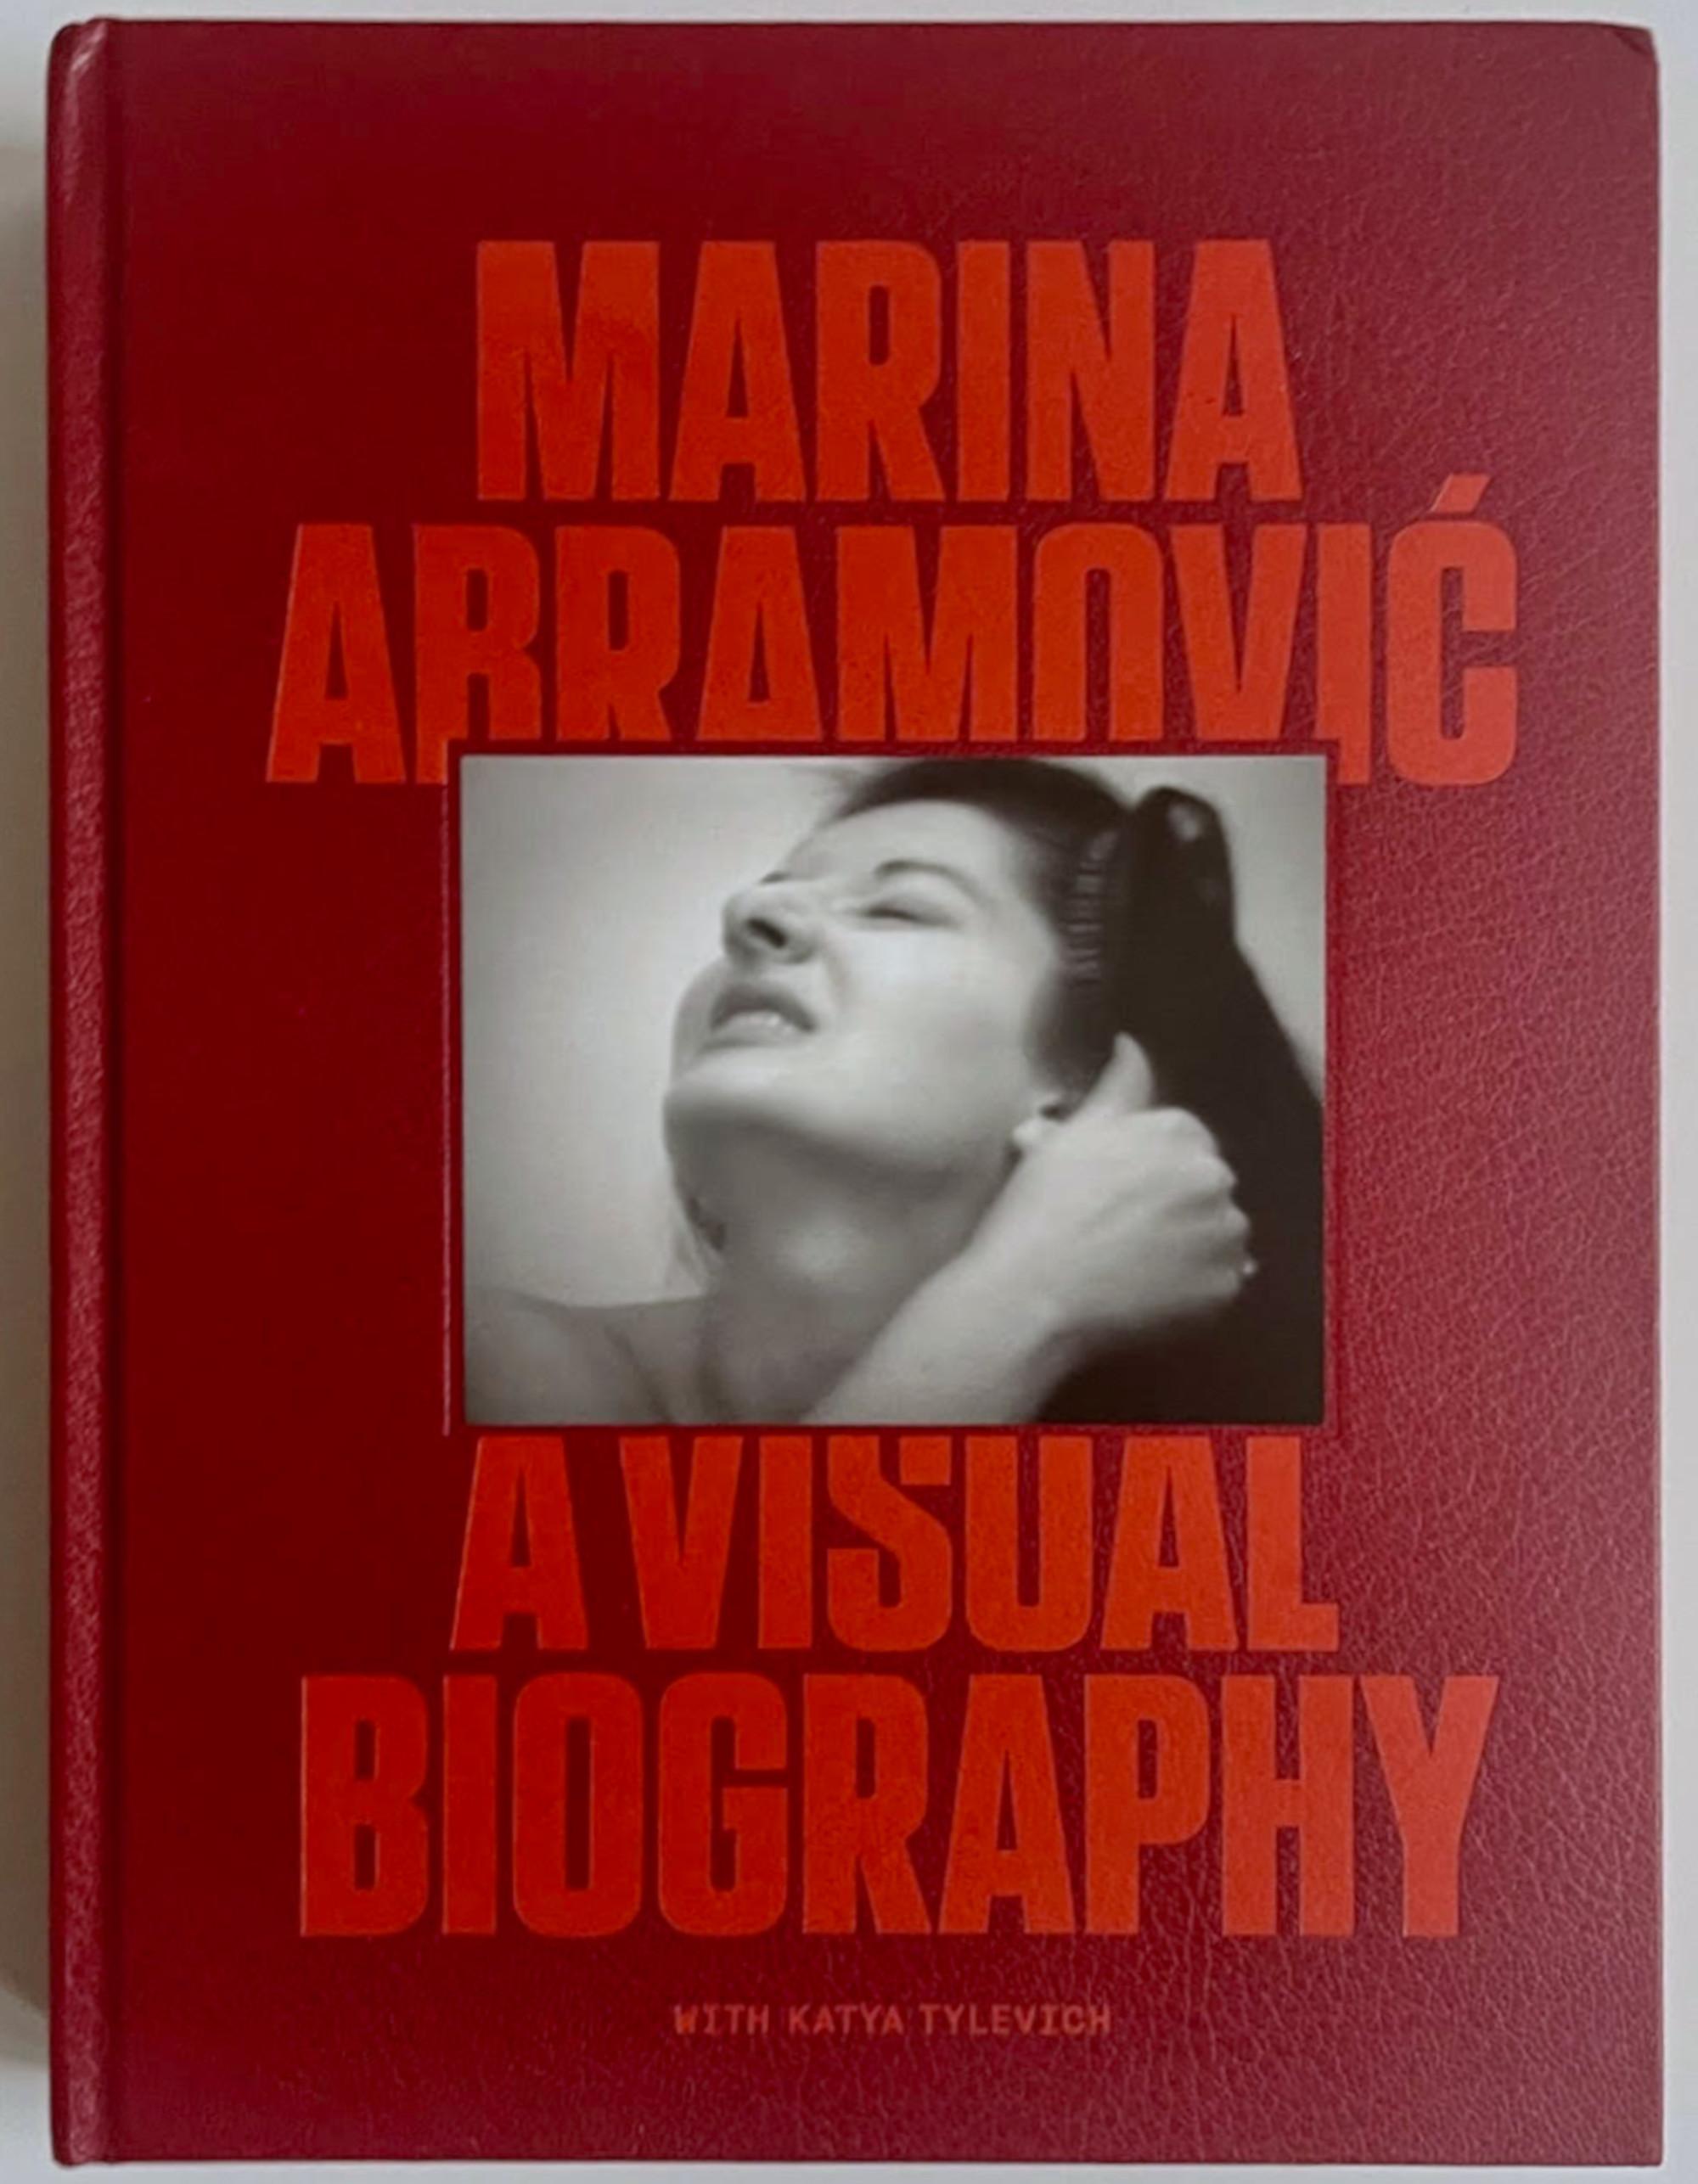 A Visual Biography (Hand signed by BOTH Marina Abramovic and Katya Tylevich) For Sale 1